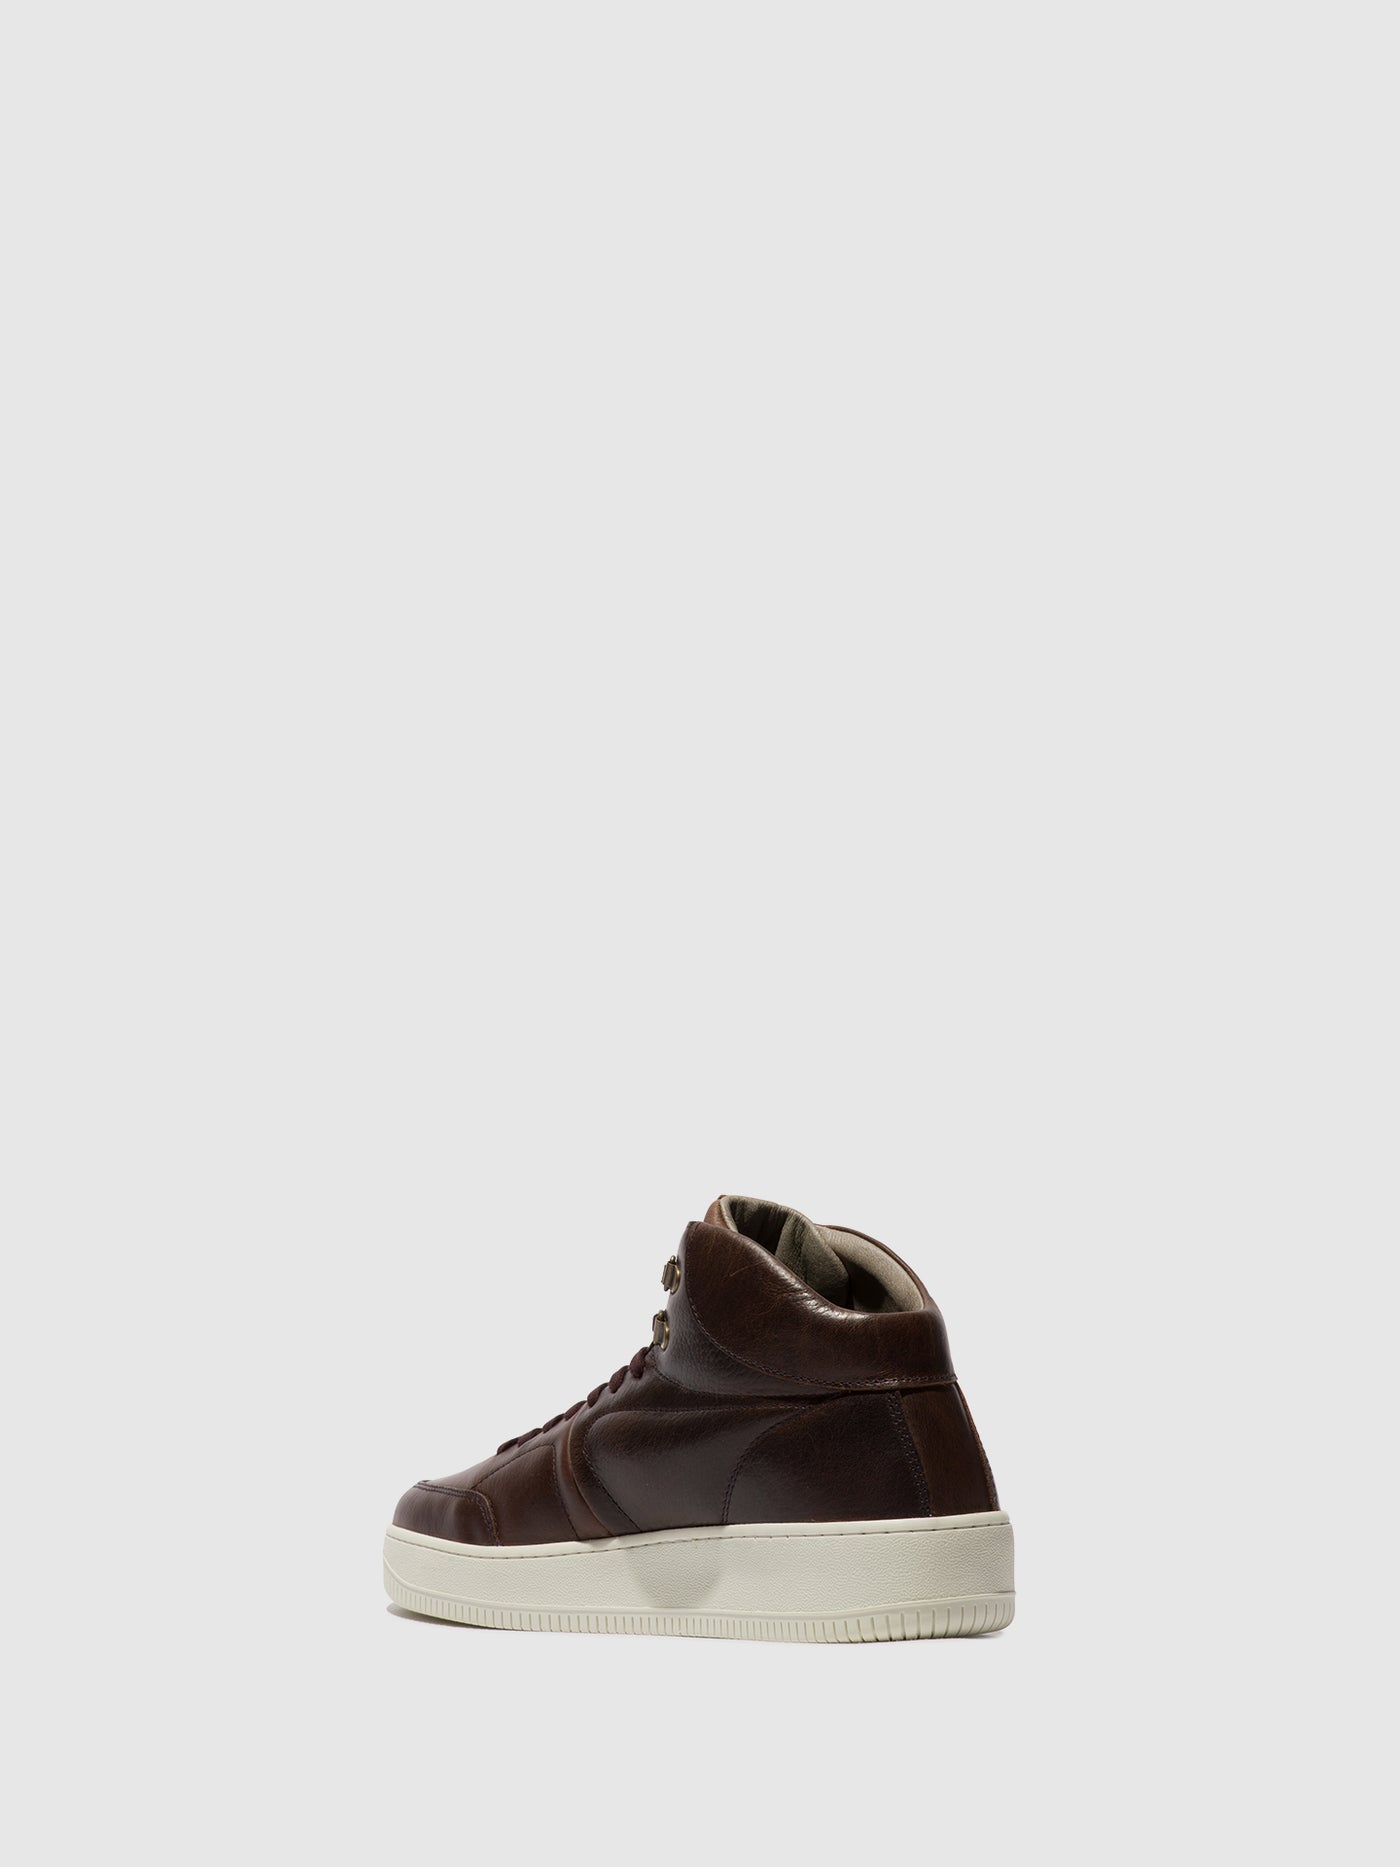 Lace-up Trainers BEAP543FLY DK.BROWN